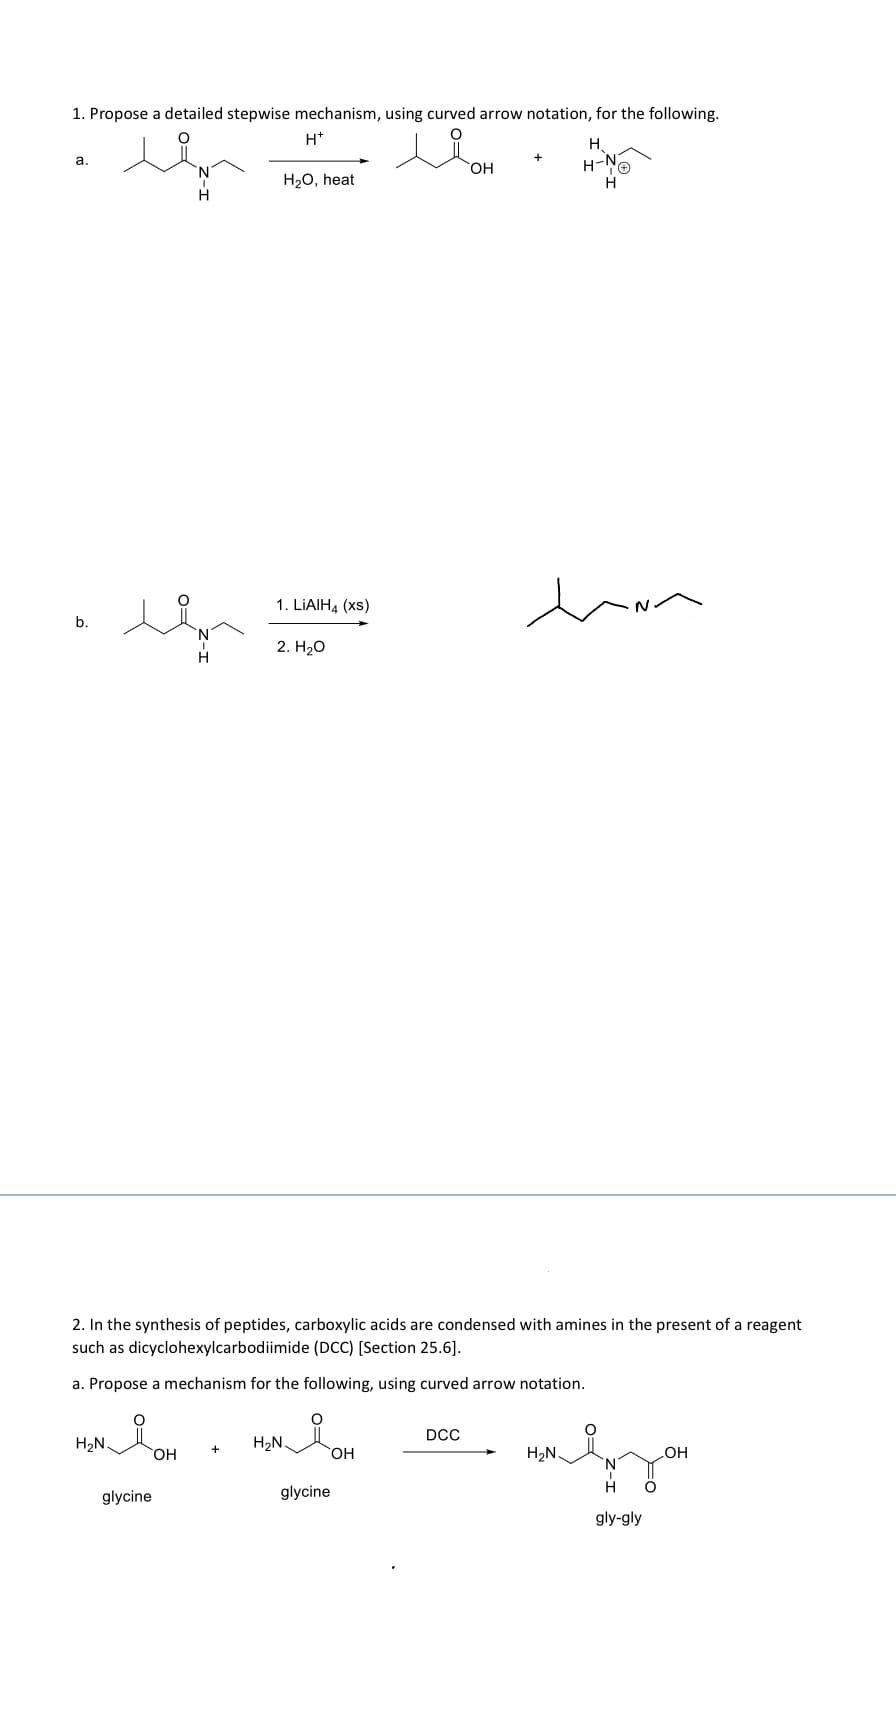 1. Propose a detailed stepwise mechanism, using curved arrow notation, for the following.
H+
H
a.
b.
H₂O, heat
1. LiAlH4 (xs)
2. H₂O
OH
H-N
H
2. In the synthesis of peptides, carboxylic acids are condensed with amines in the present of a reagent
such as dicyclohexylcarbodiimide (DCC) [Section 25.6].
a. Propose a mechanism for the following, using curved arrow notation.
°
DCC
H₂N
H₂N
OH
OH
H₂N
glycine
glycine
OH
Янзон
gly-gly